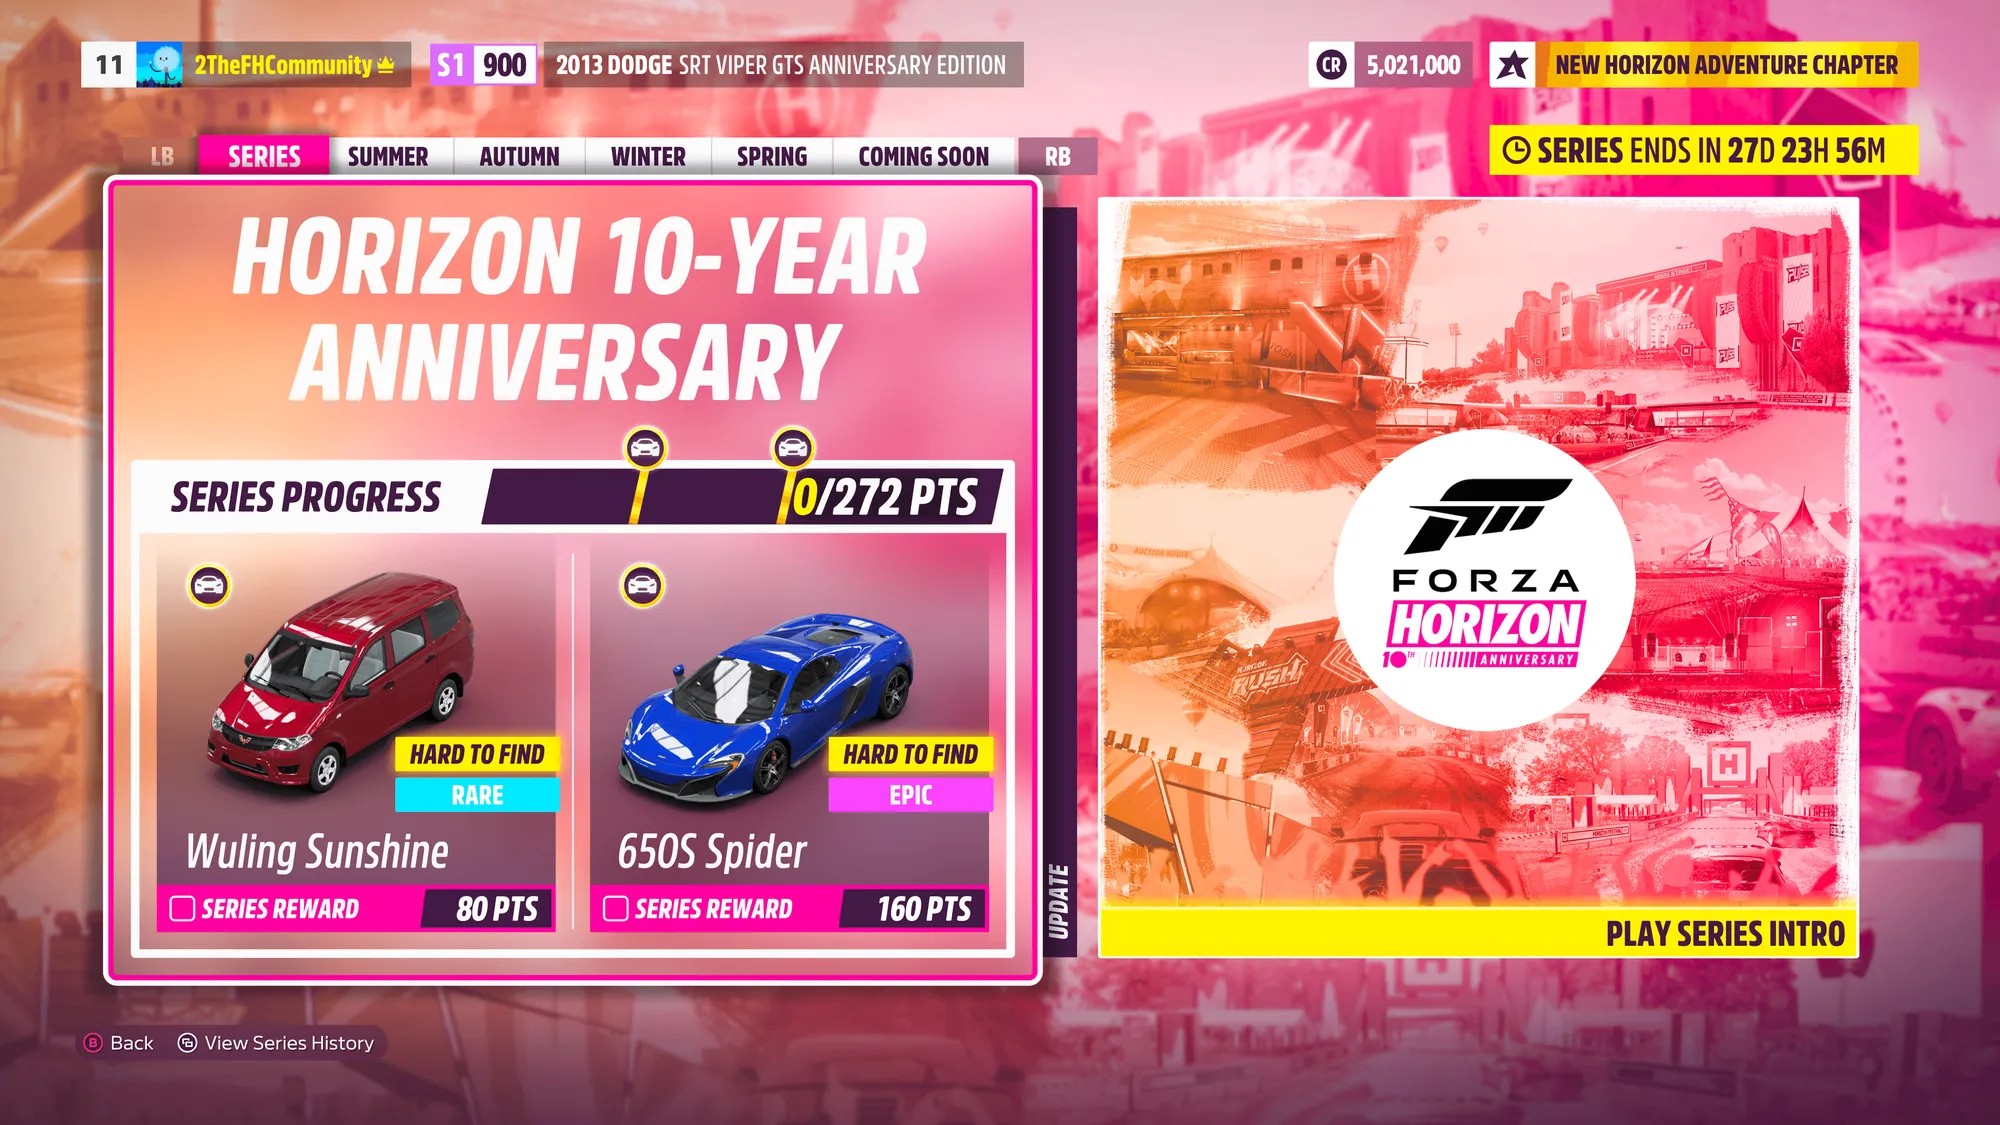 Forza Horizon 5 will celebrate 10 years of the franchise in